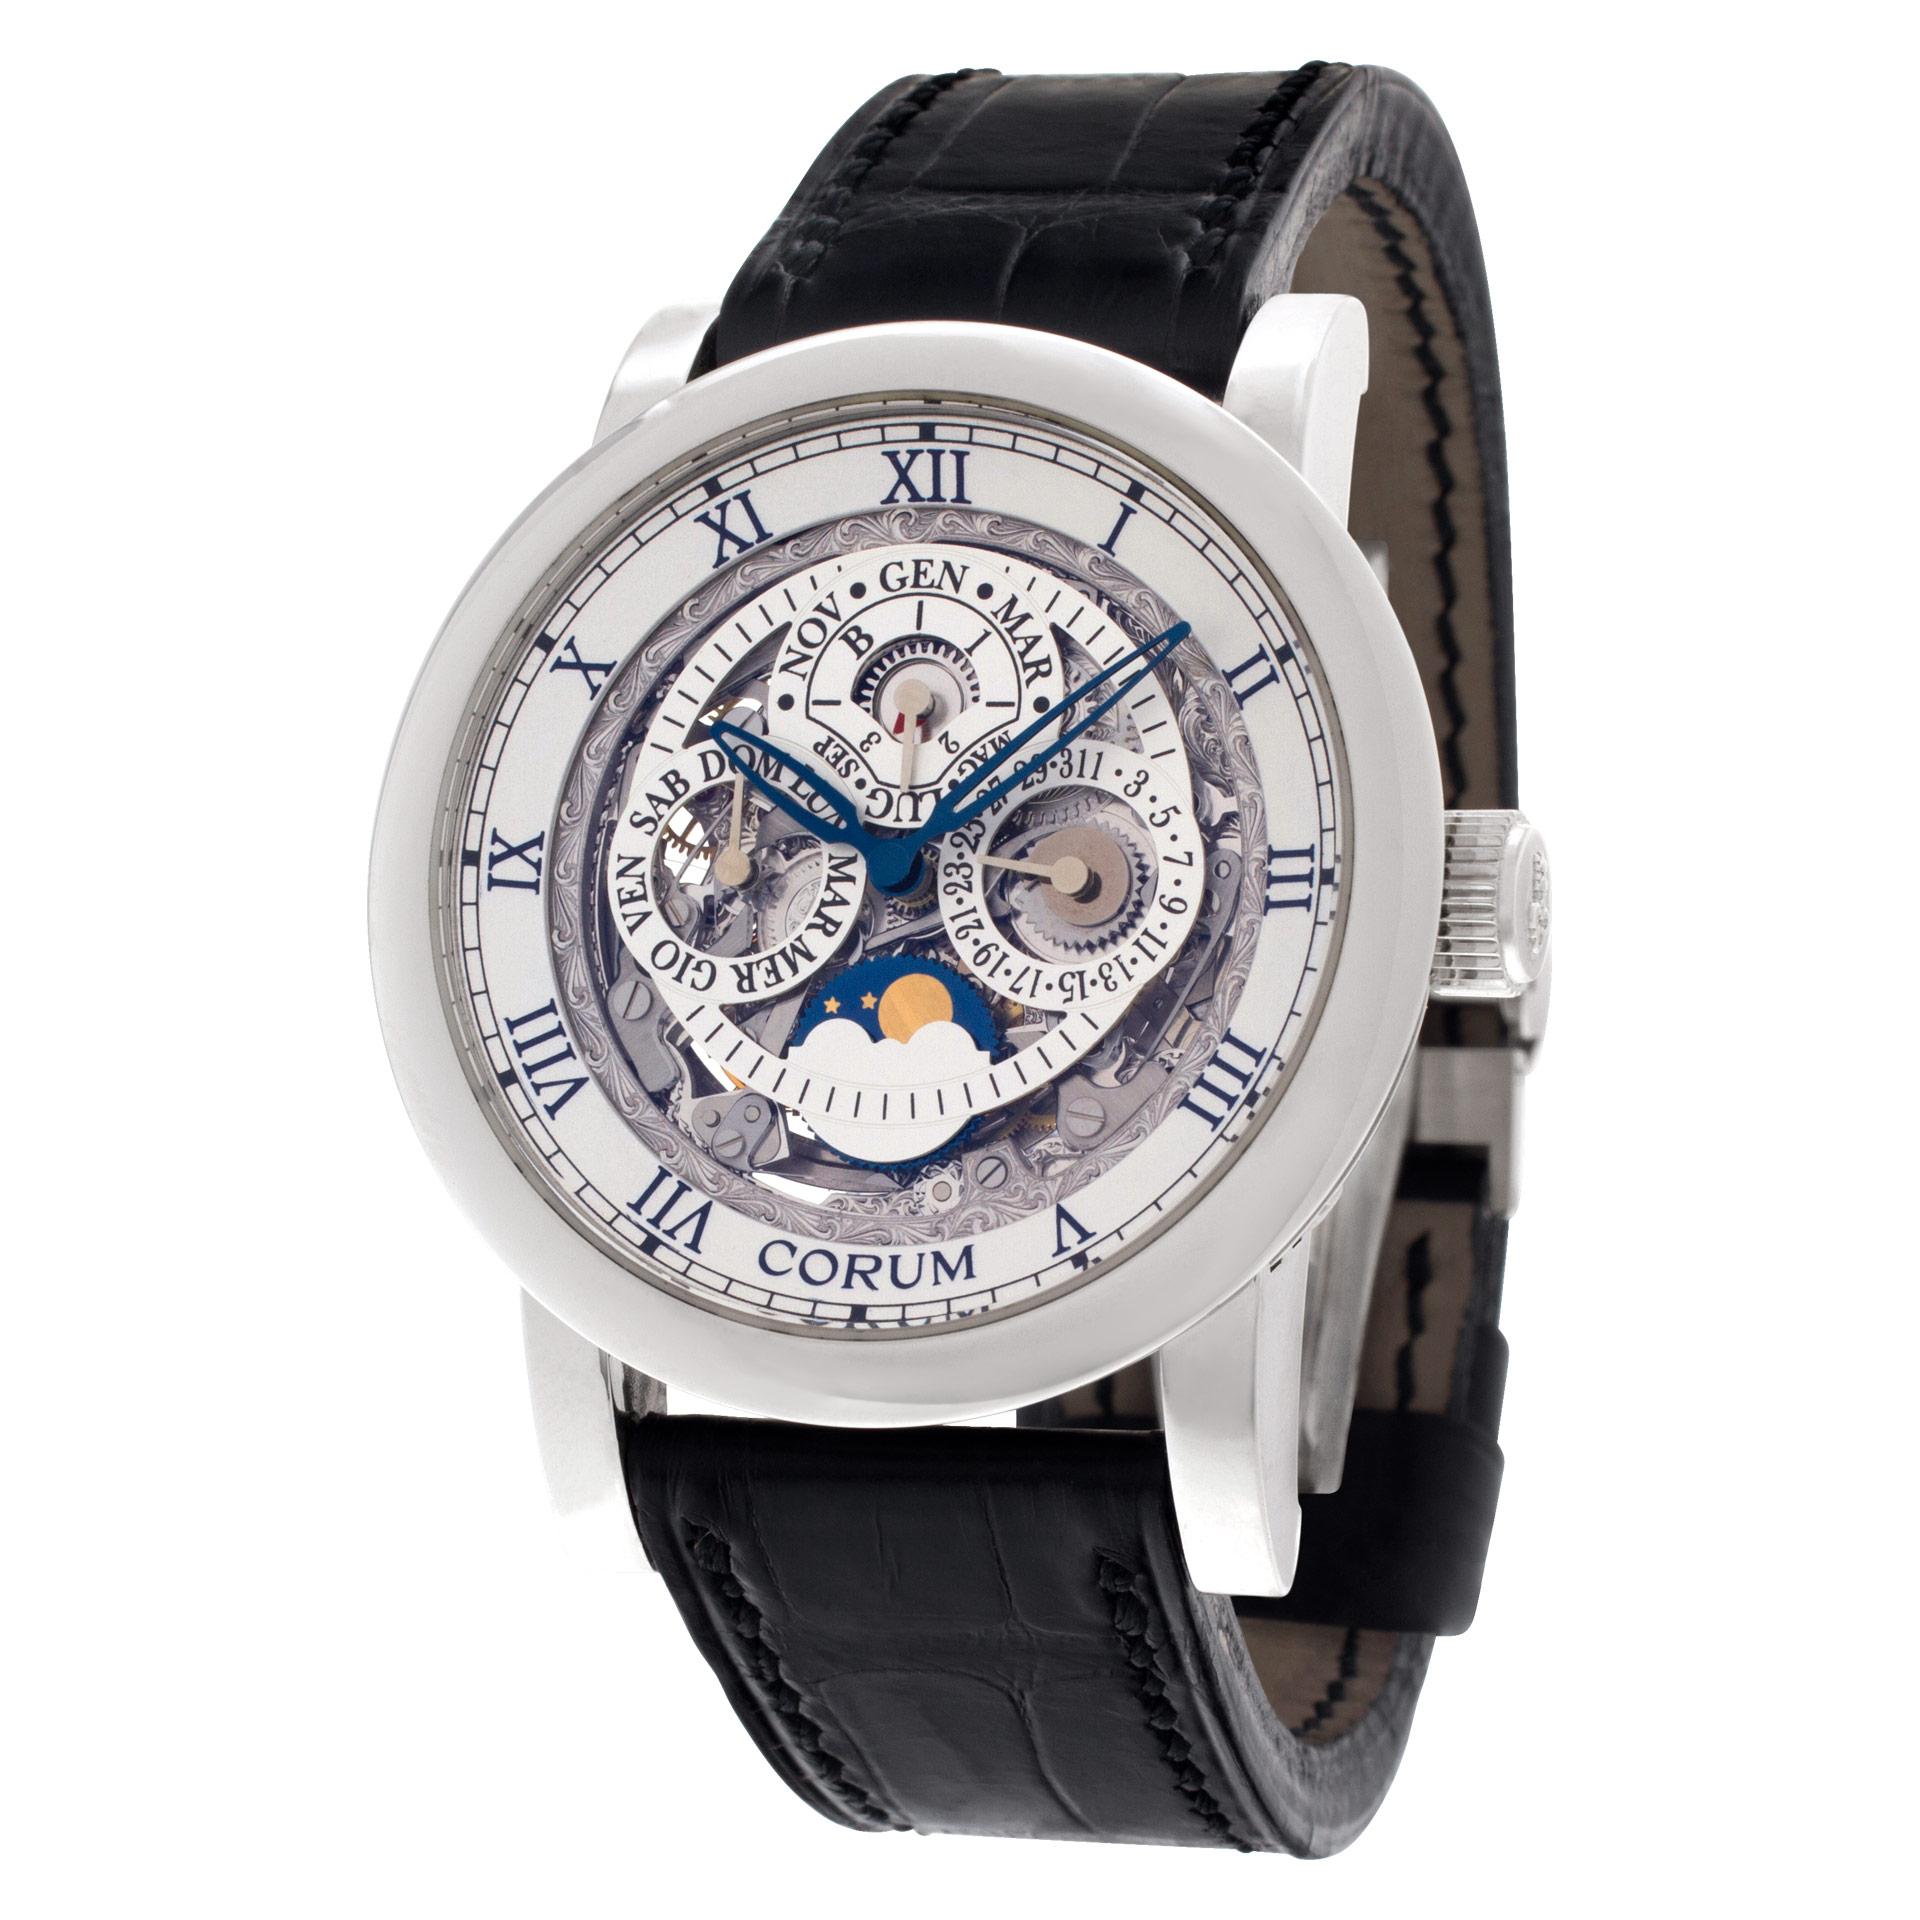 Corum Perpetual Calendar Skeleton in platinum on leather strap with 18k white gold deployant buckle. Auto w/ moonphase and perpetual calendar. 42 mm case size. Ref 183.201.70. Fine Pre-owned Corum Watch. Certified preowned Corum Perpetual Calendar